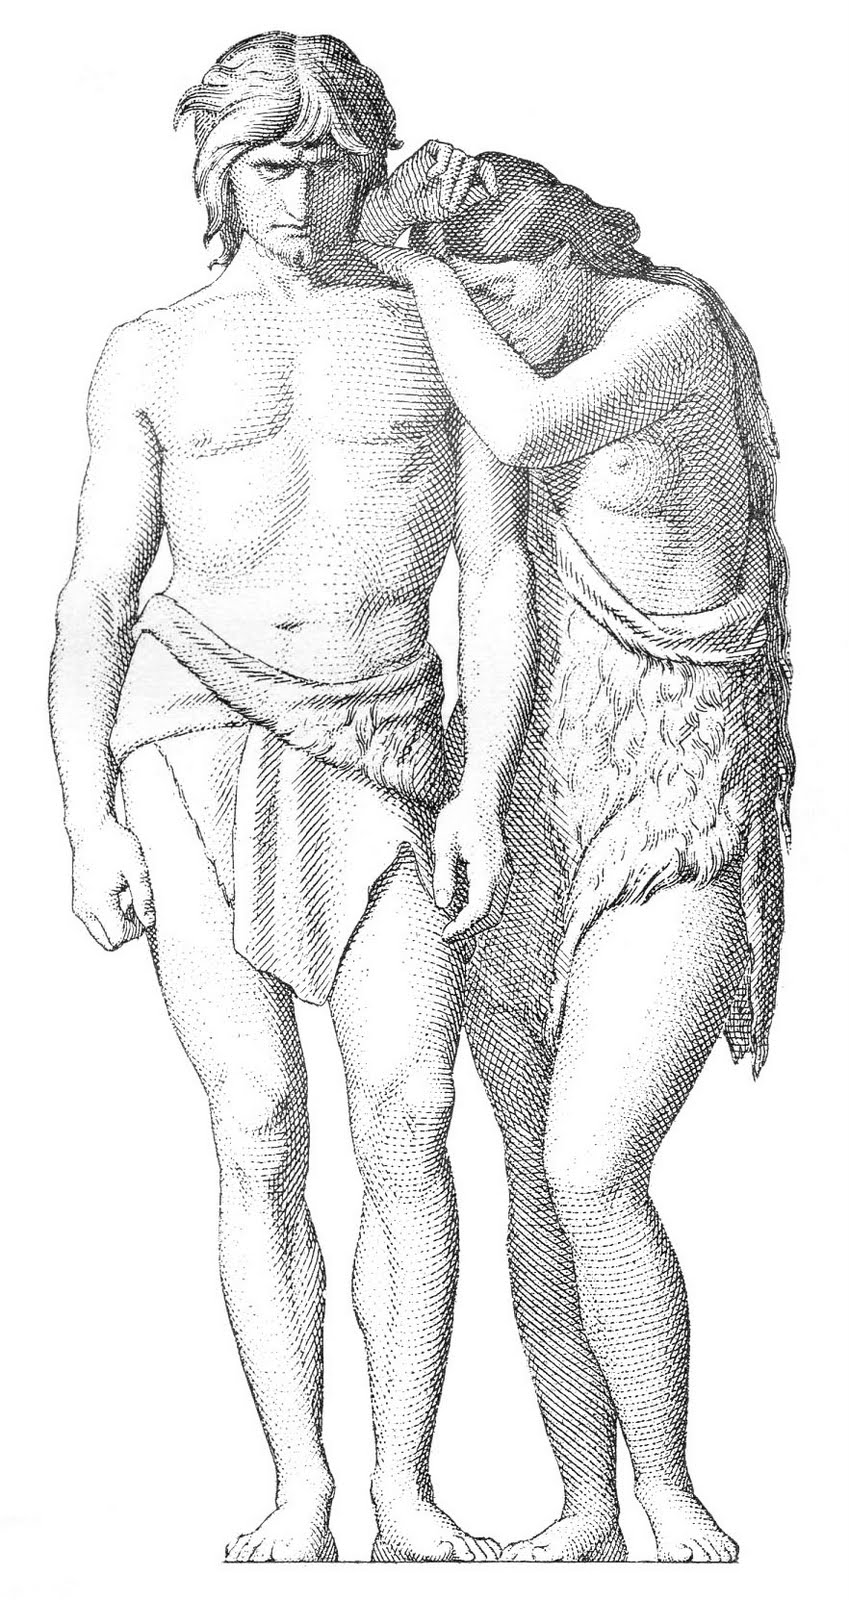 Vintage Religious Clip Art   Adam And Eve Engraving   The Graphics